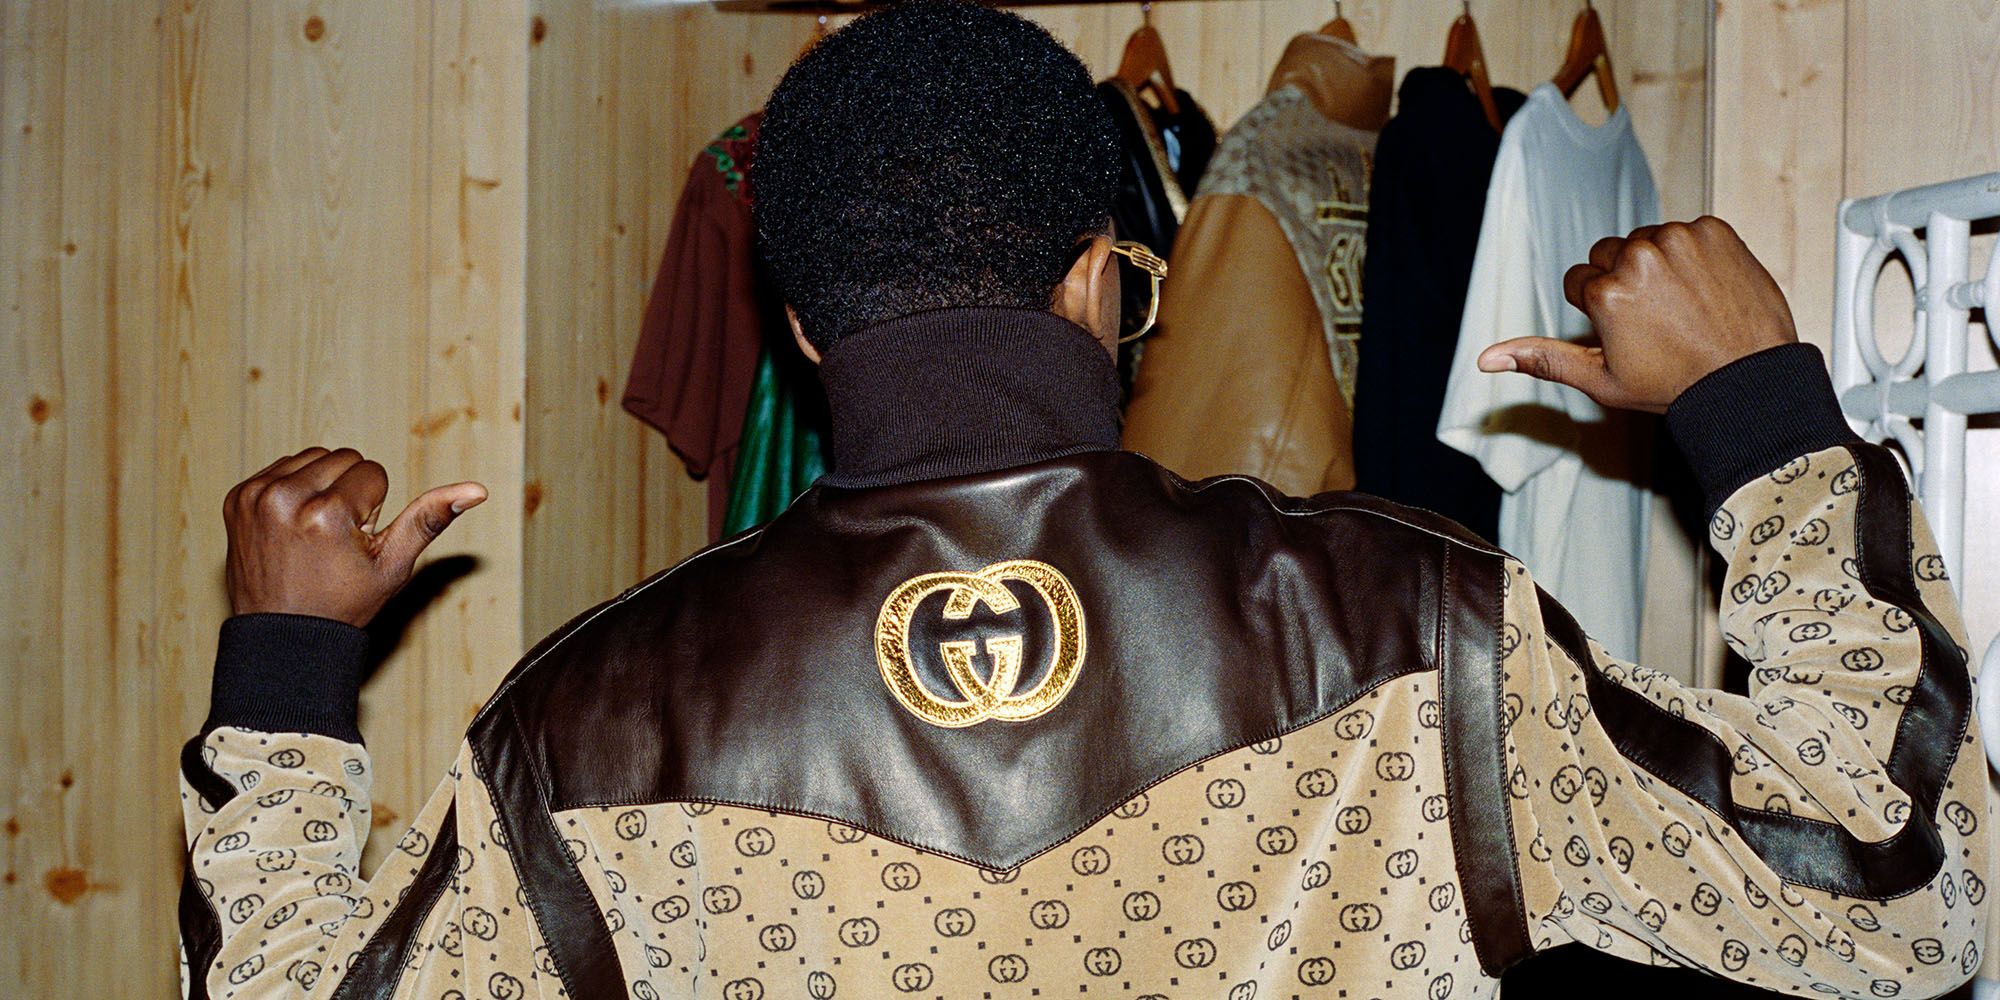 Introducing the Gucci-Dapper Dan collection for Fall Winter 2018